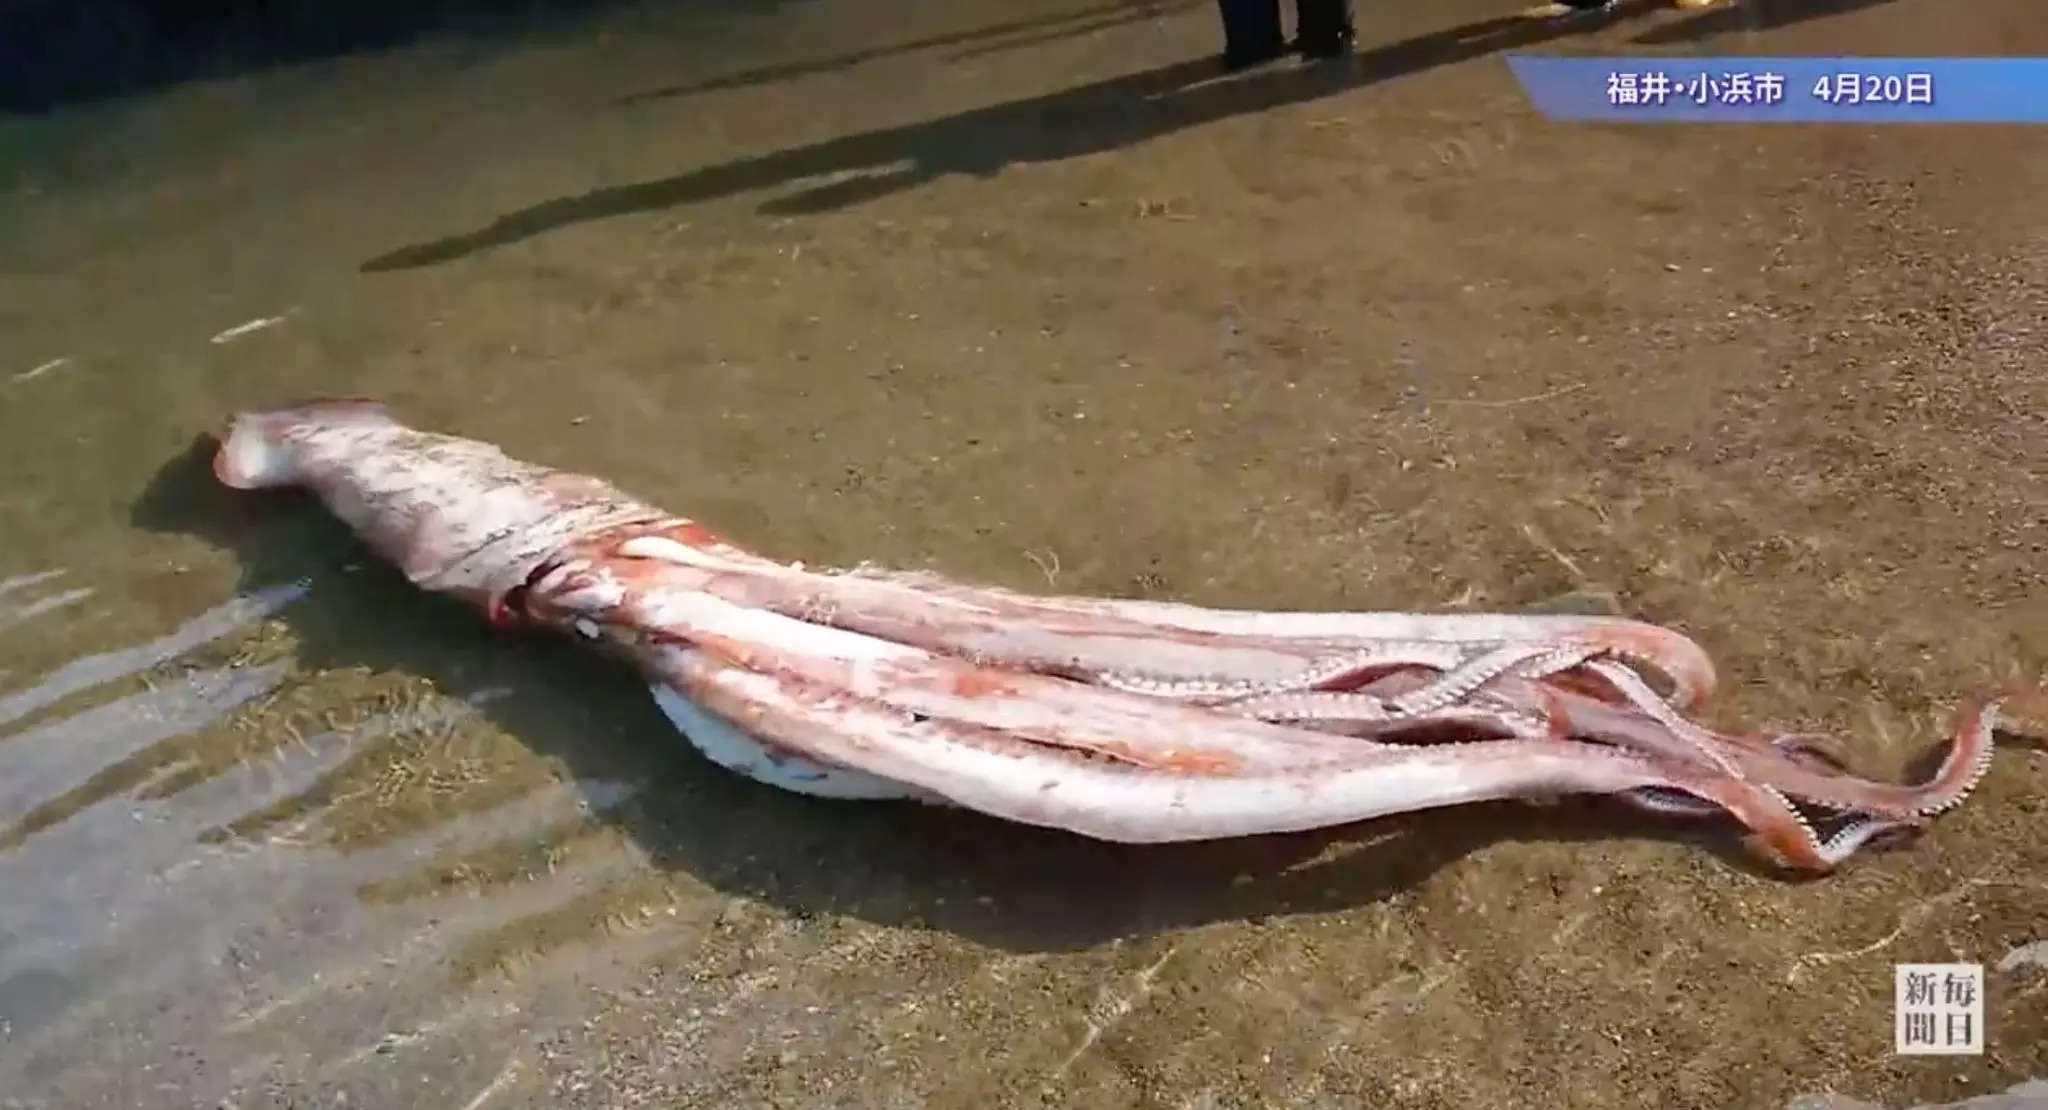 The massive squid washed up alive on a beach in Obama in a rare occurrence | Twitter/@eizo_desk